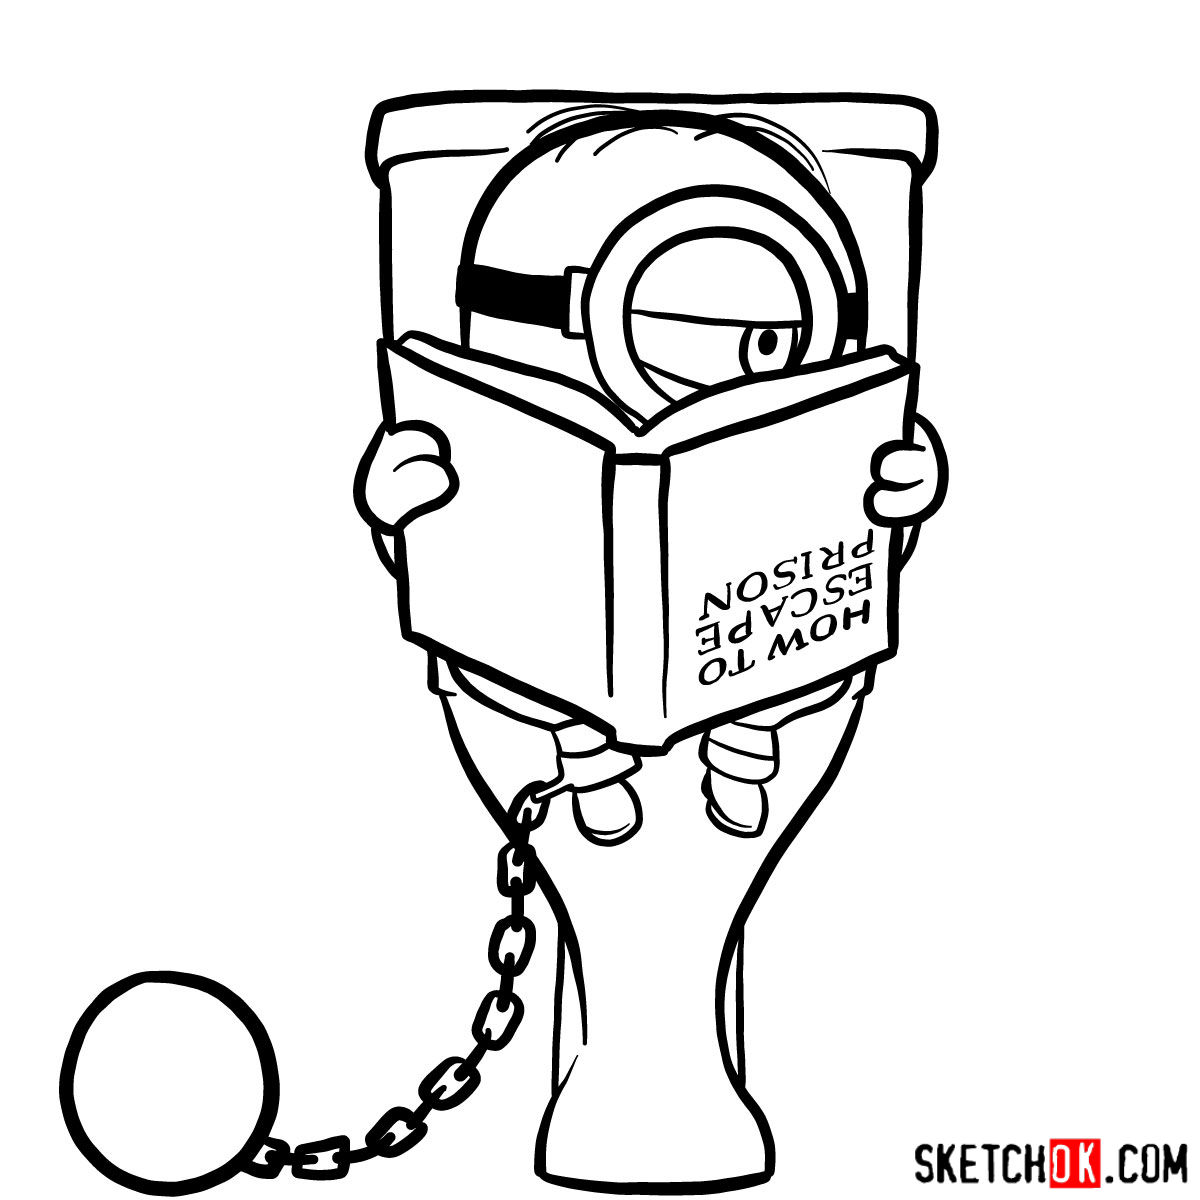 How to draw minion in the toilet reading a book - step 11